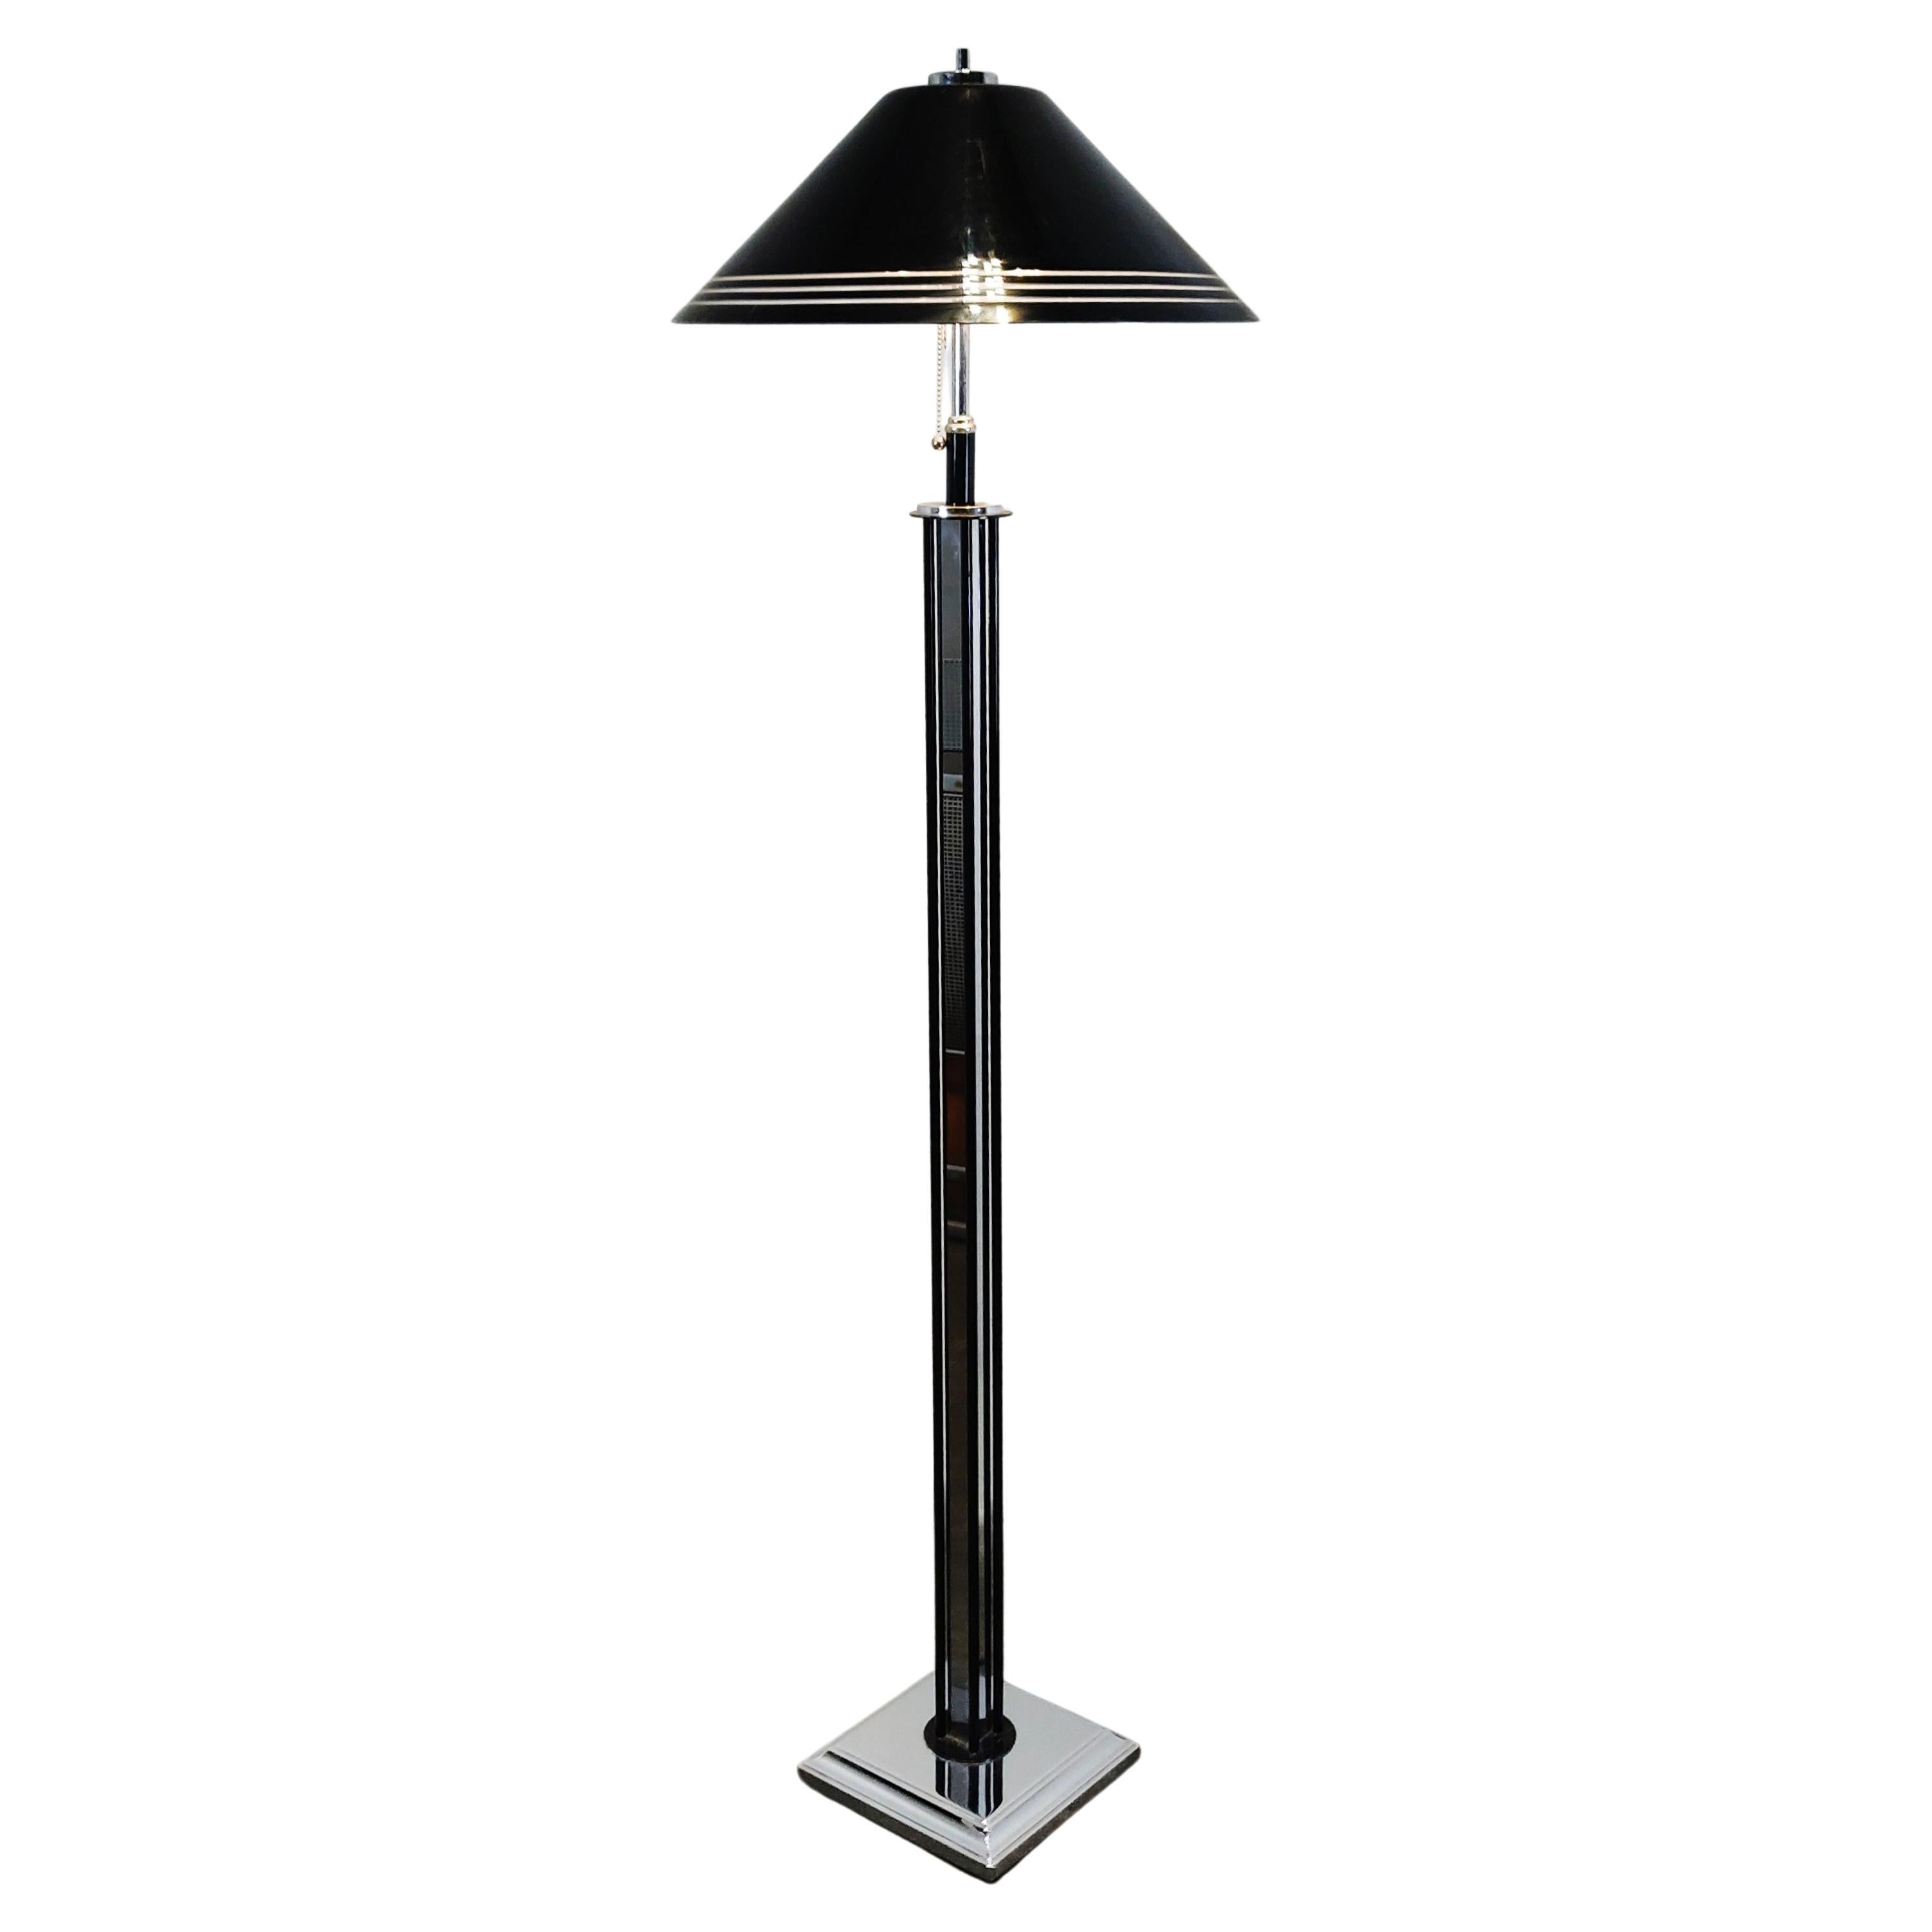 20th Century Hollywood Regency Floor Lamp in style of Willy Rizzo.